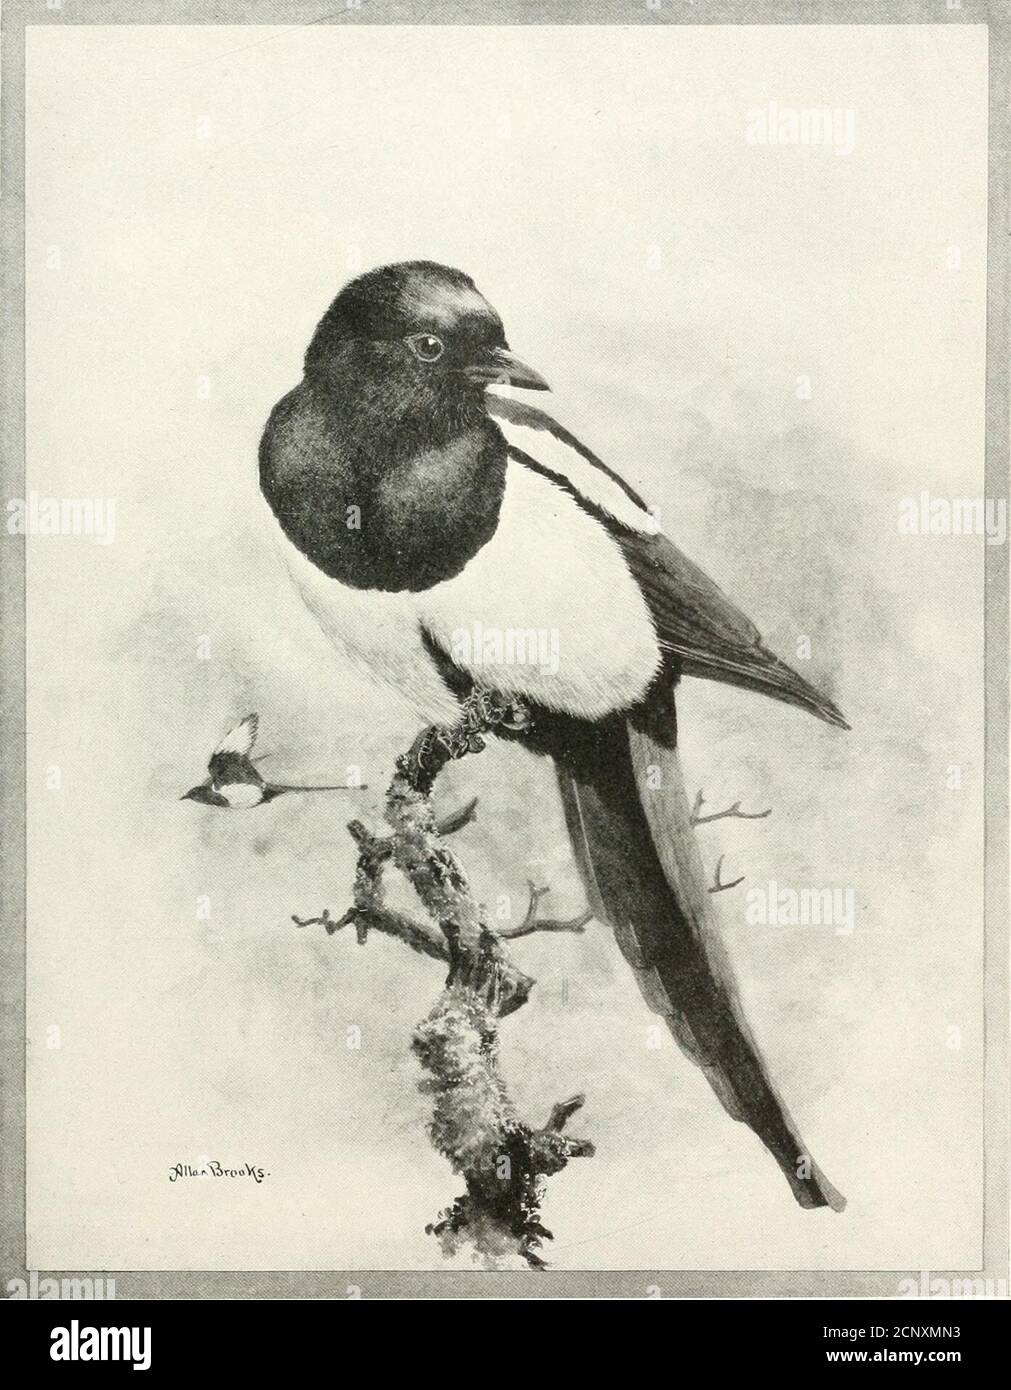 . The birds of Washington : a complete, scientific and popular account of the 372 species of birds found in the state . r.i/.L-ji III )il.iiiia Liiiiity. XEST OF MAGPIK IX GKJvASJ.W l&gt;i &gt;l) Fliuli bv tiic Amu. AMERICAN MAGPIE. 26 THE AMERICAN MAGPIE. tliru the s; lirush, poking, prying, spying, and dcuuring, with the ruth- lessness and precisidii of a pestilence. Not only eggs but young birds areappropriated. 1 once saw a Magpie seize a half-grown Meadowlark fromits nest, carry it to its own domicile, and parcel it out among its clamoring l)rood. Then, in spite of the best defense the Stock Photo